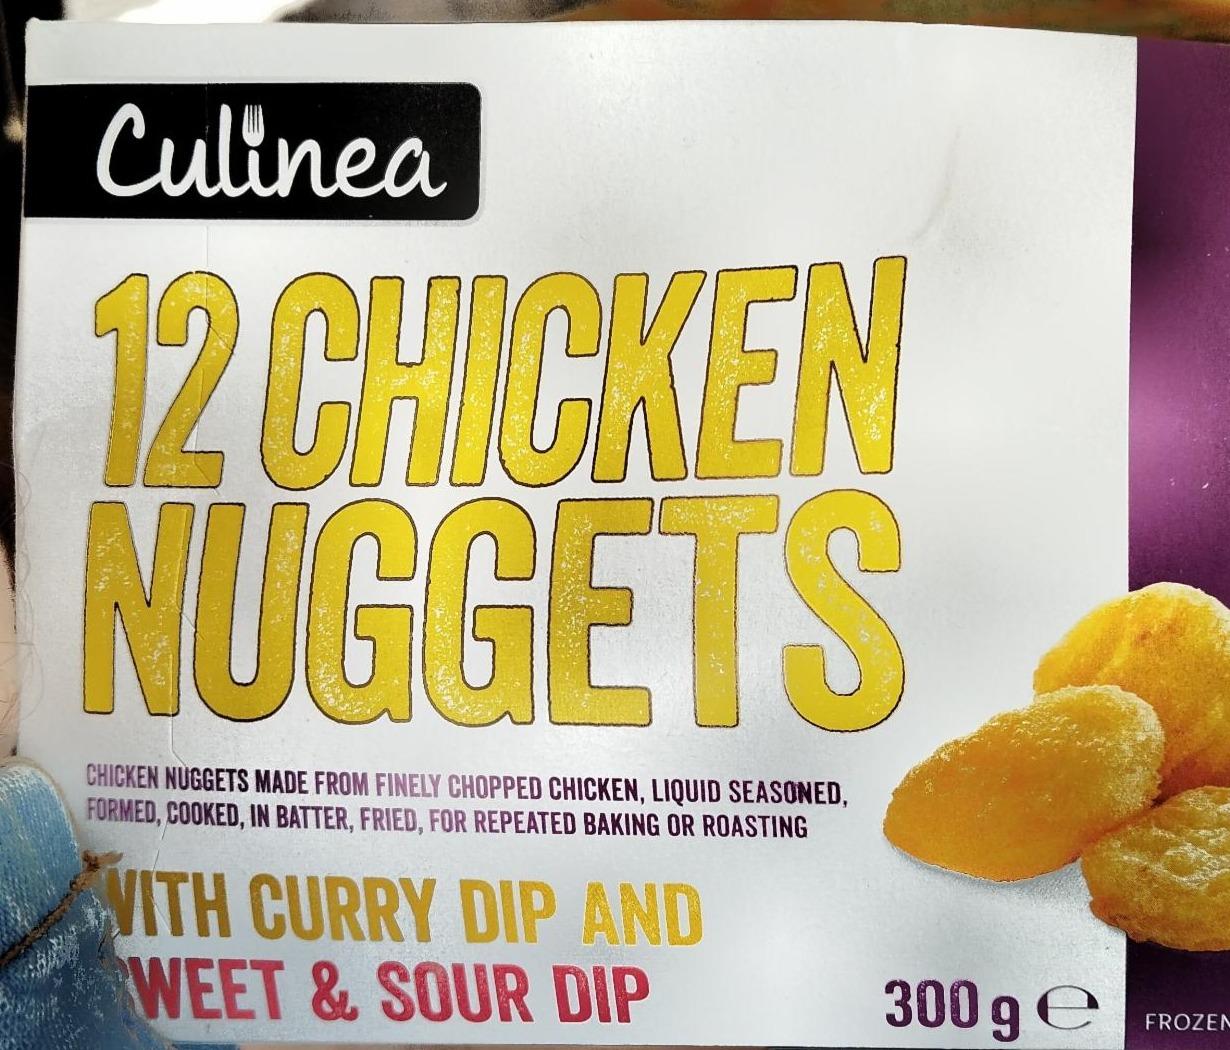 Fotografie - 12 Chicken nuggets with curry dip and sweet & sour dip Culinea